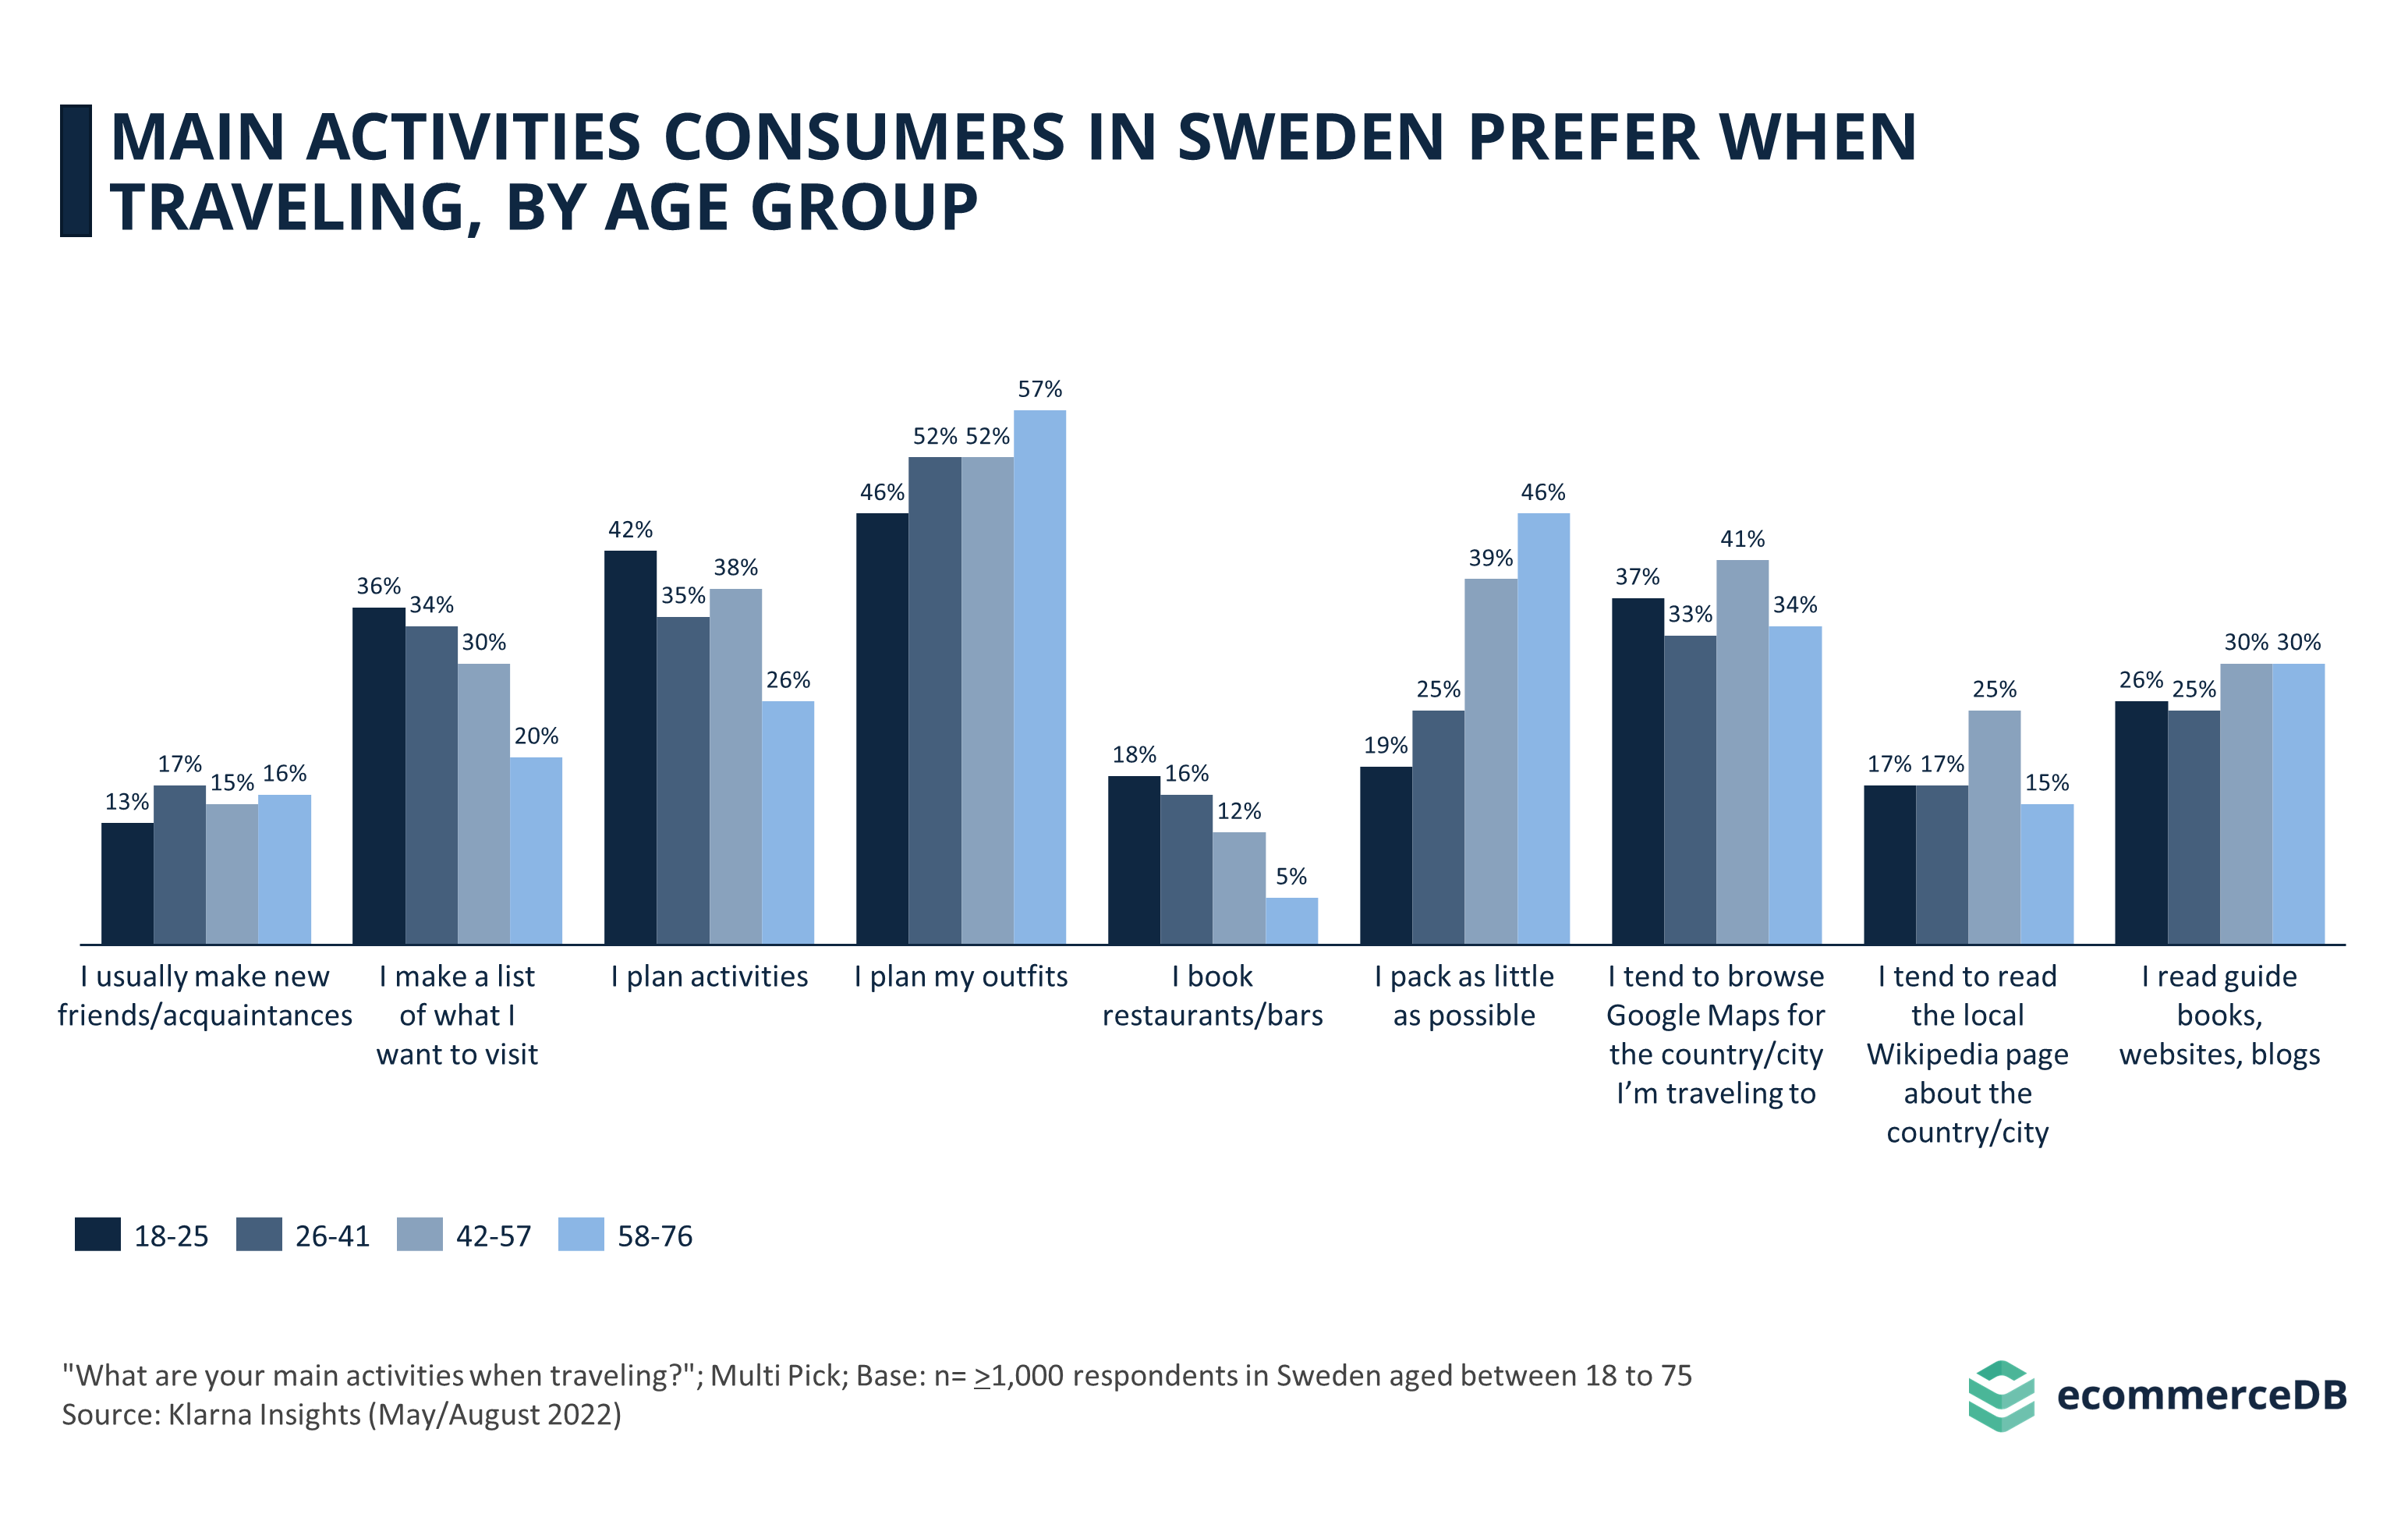 Main Activities When Consumers in Sweden Prefer When Traveling, by Age Group